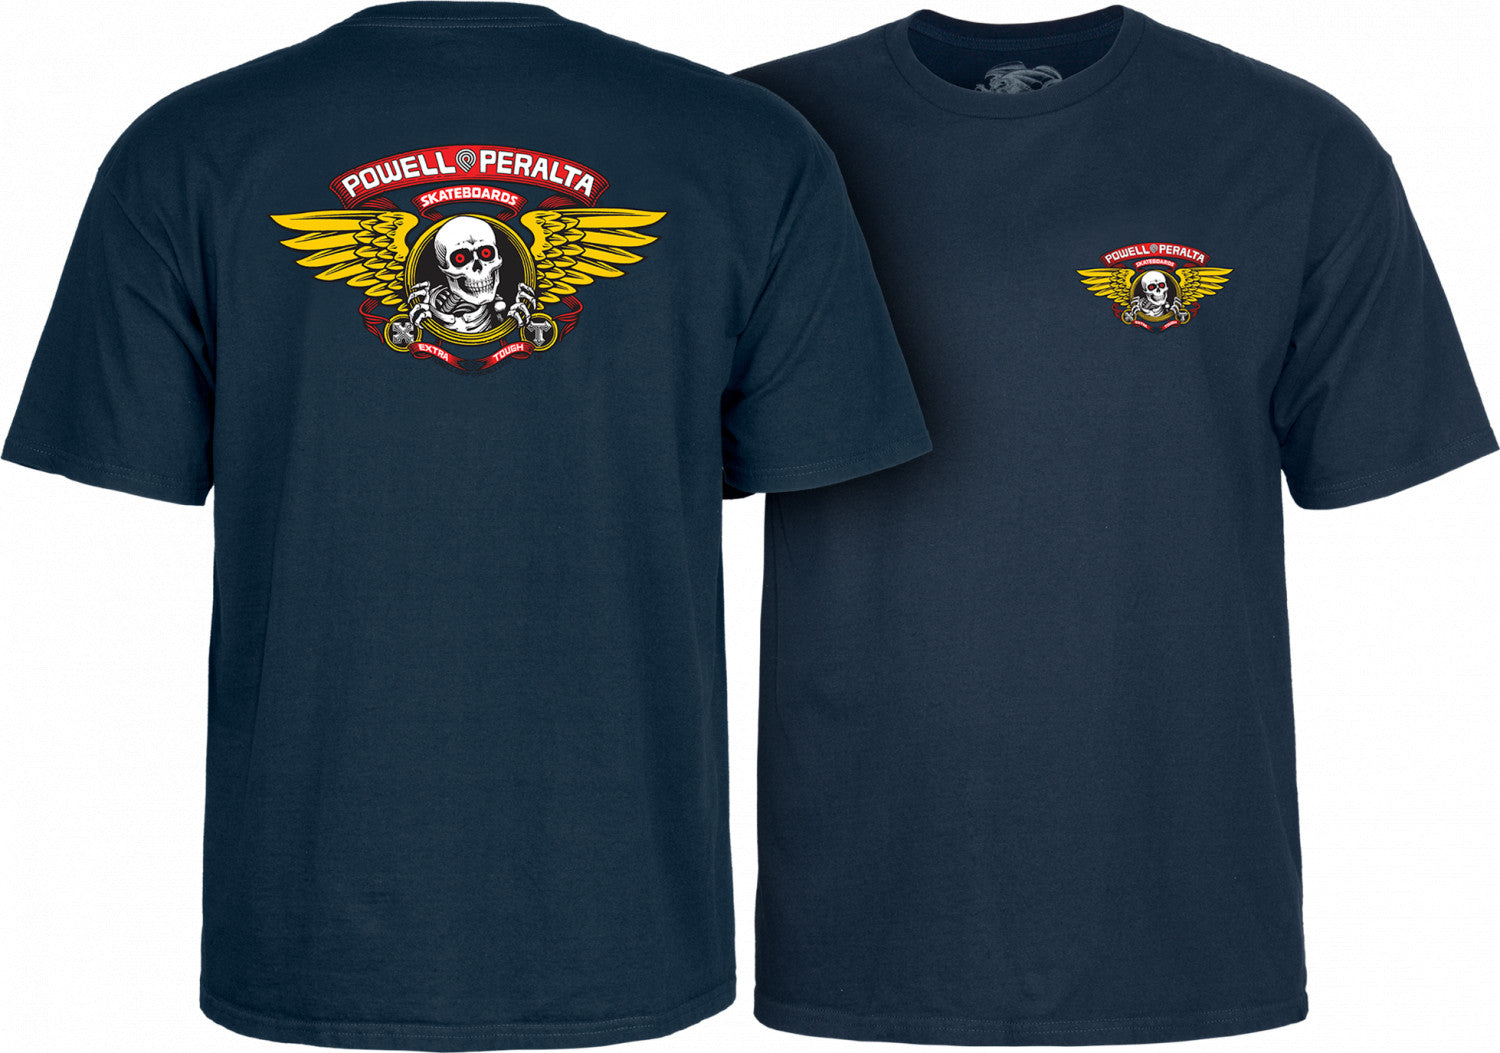 Powell Peralta Winged Ripper S/S Tee Navy XL